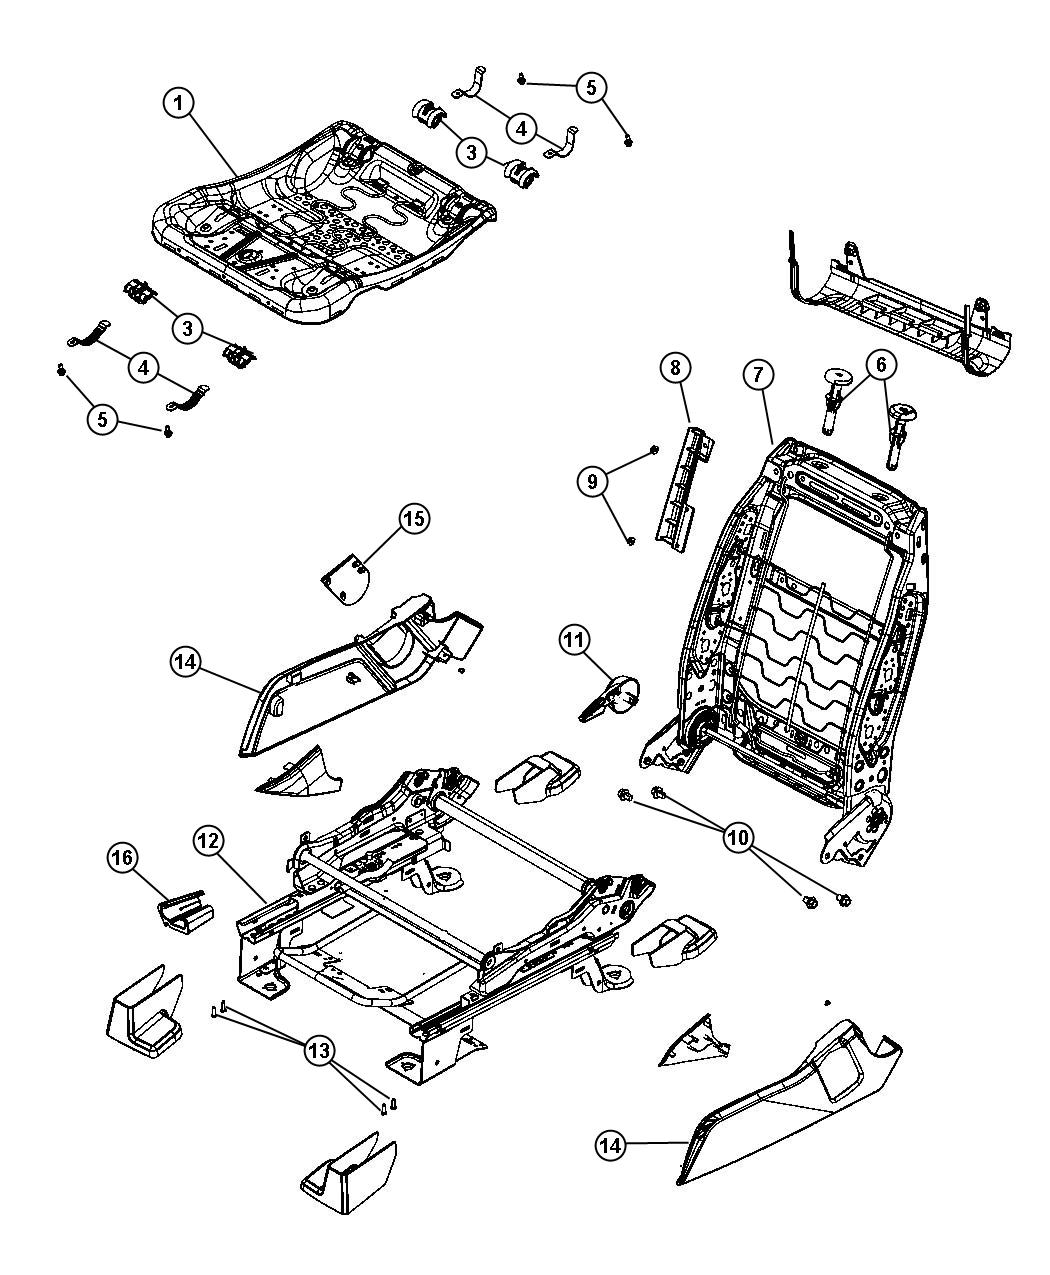 Adjusters , Recliners and Shields - Passenger Seat Manual. Diagram